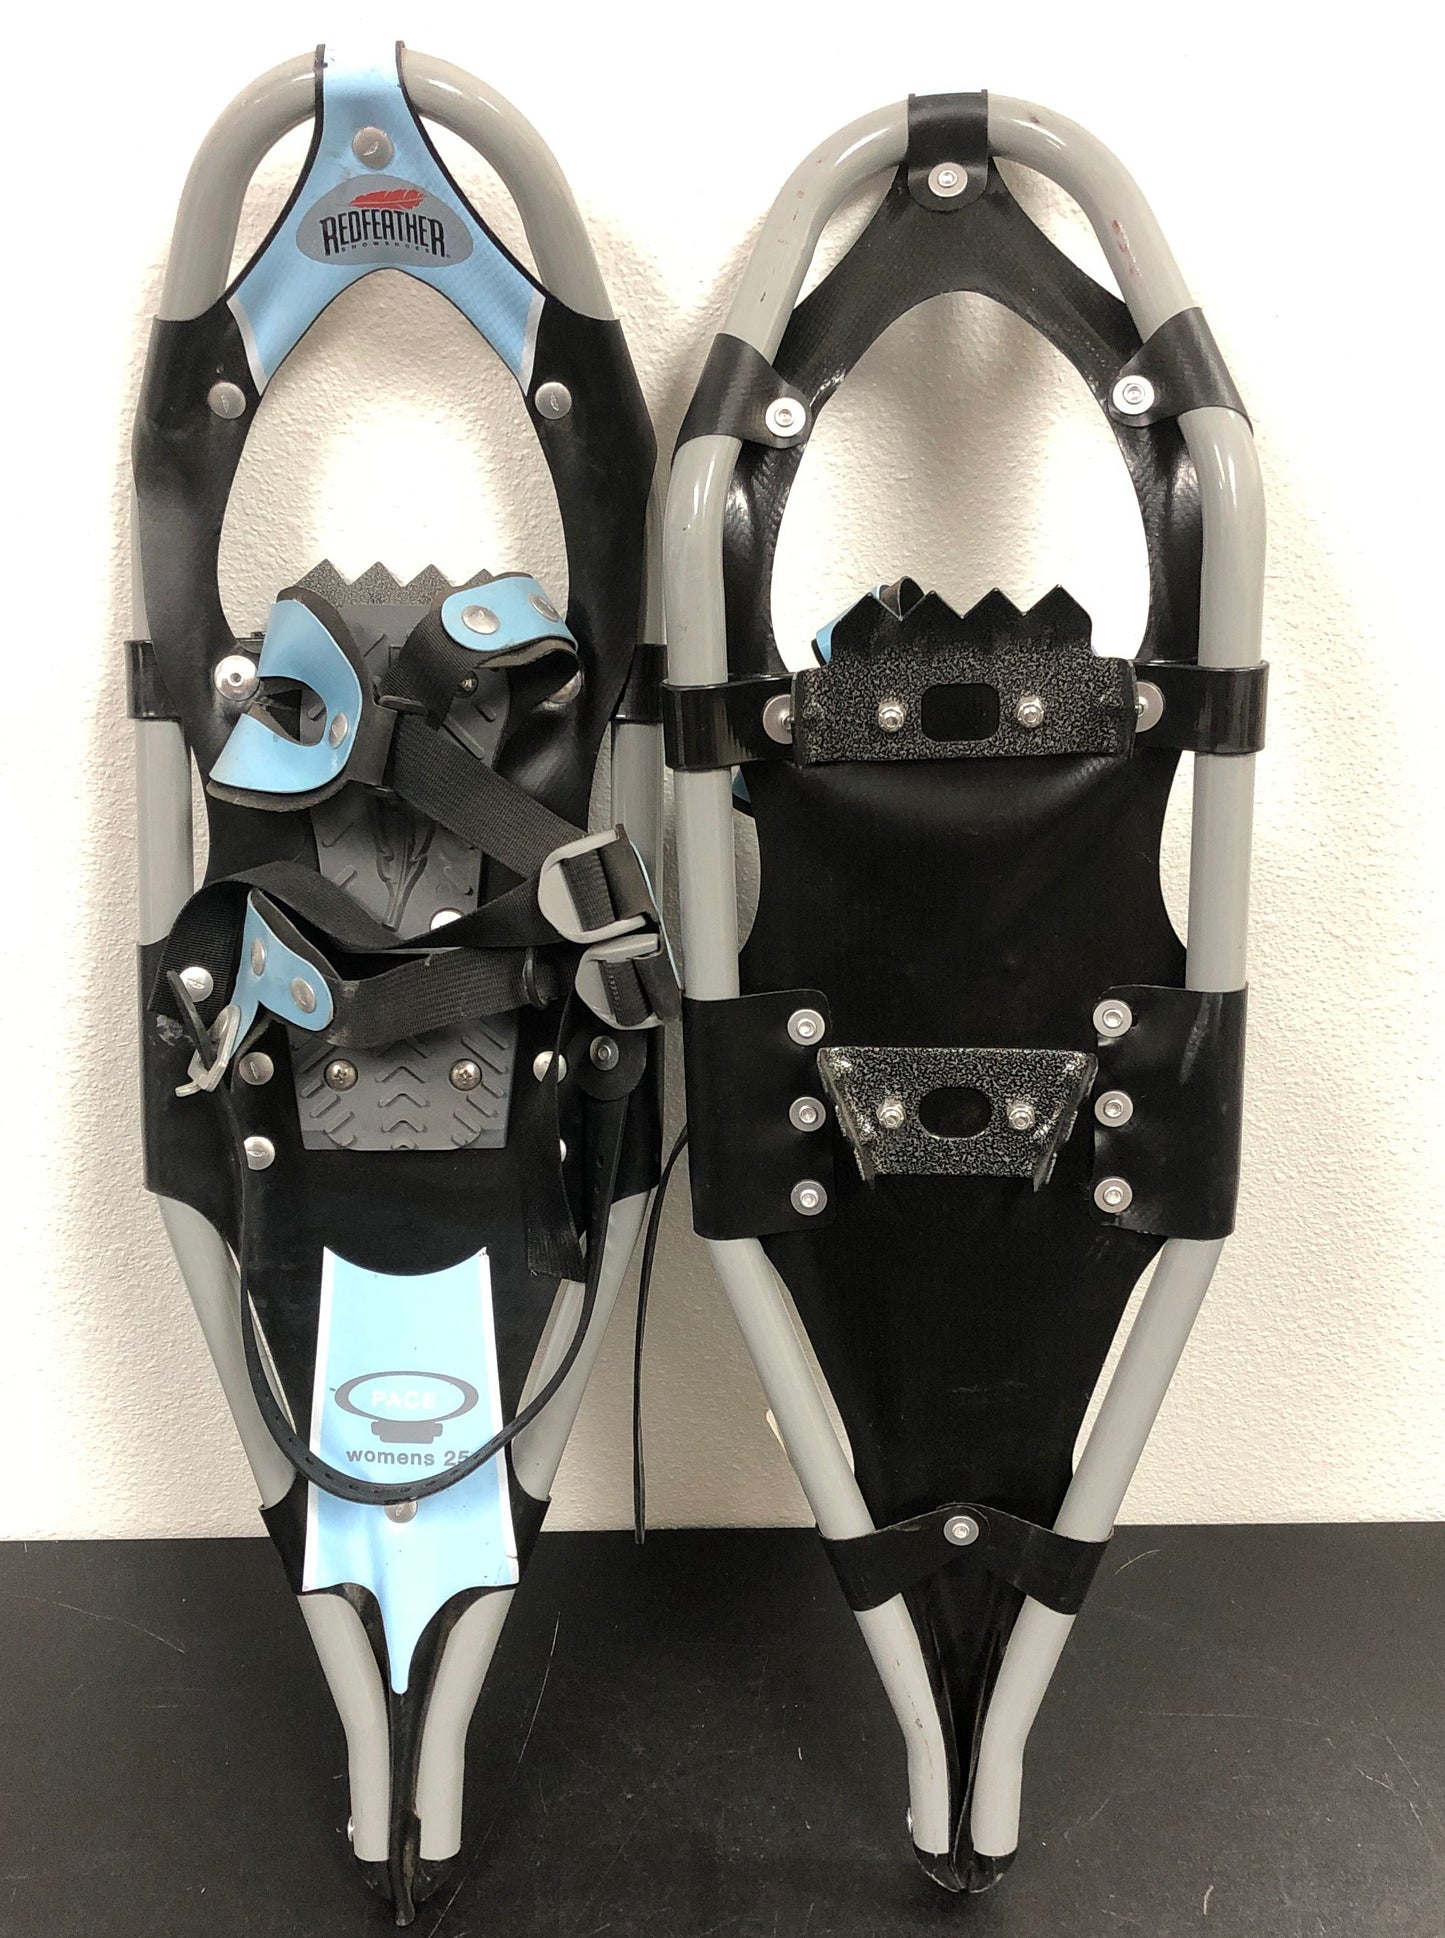 Redfeather Snowshoes - Pace Womens 25 - Crafted In Lacrosse, WI - USA (02)